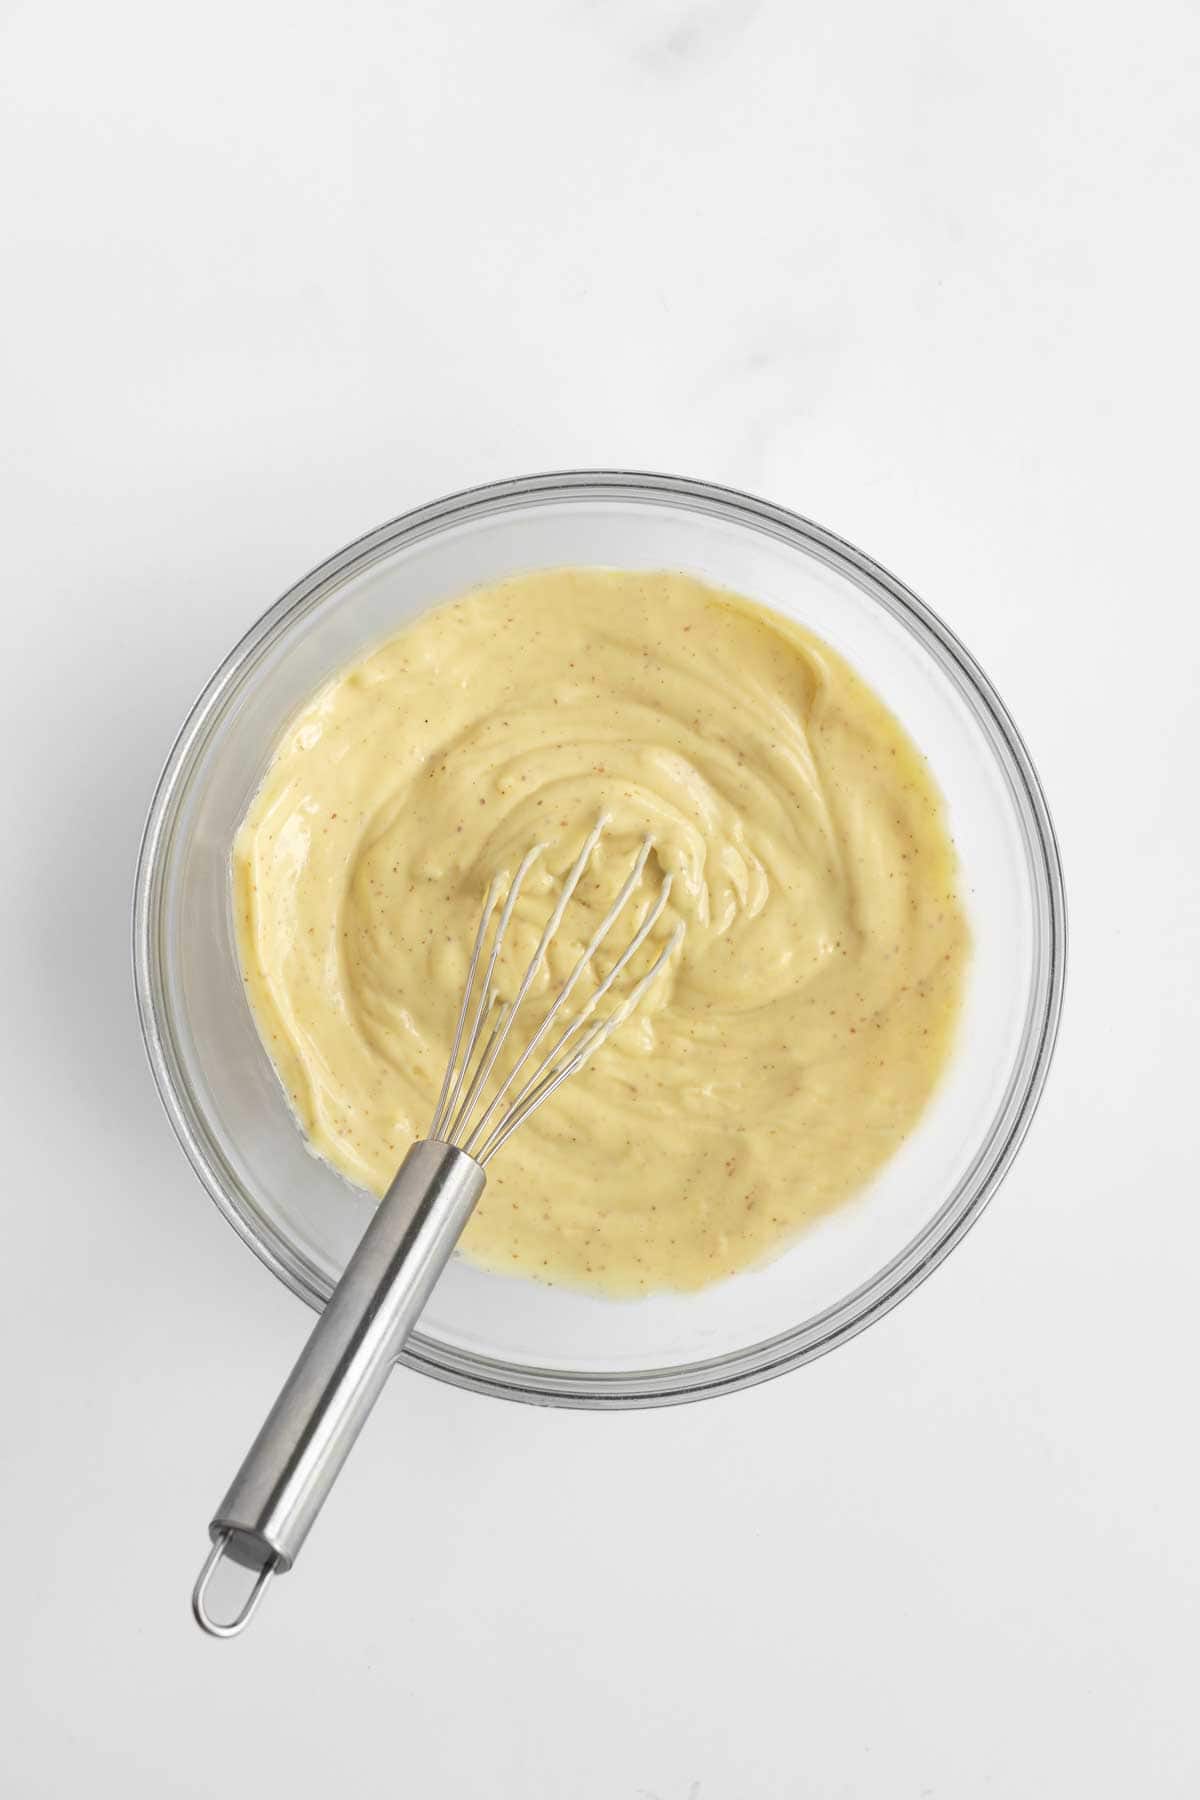 Potato salad dressing in a bowl with a whisk.